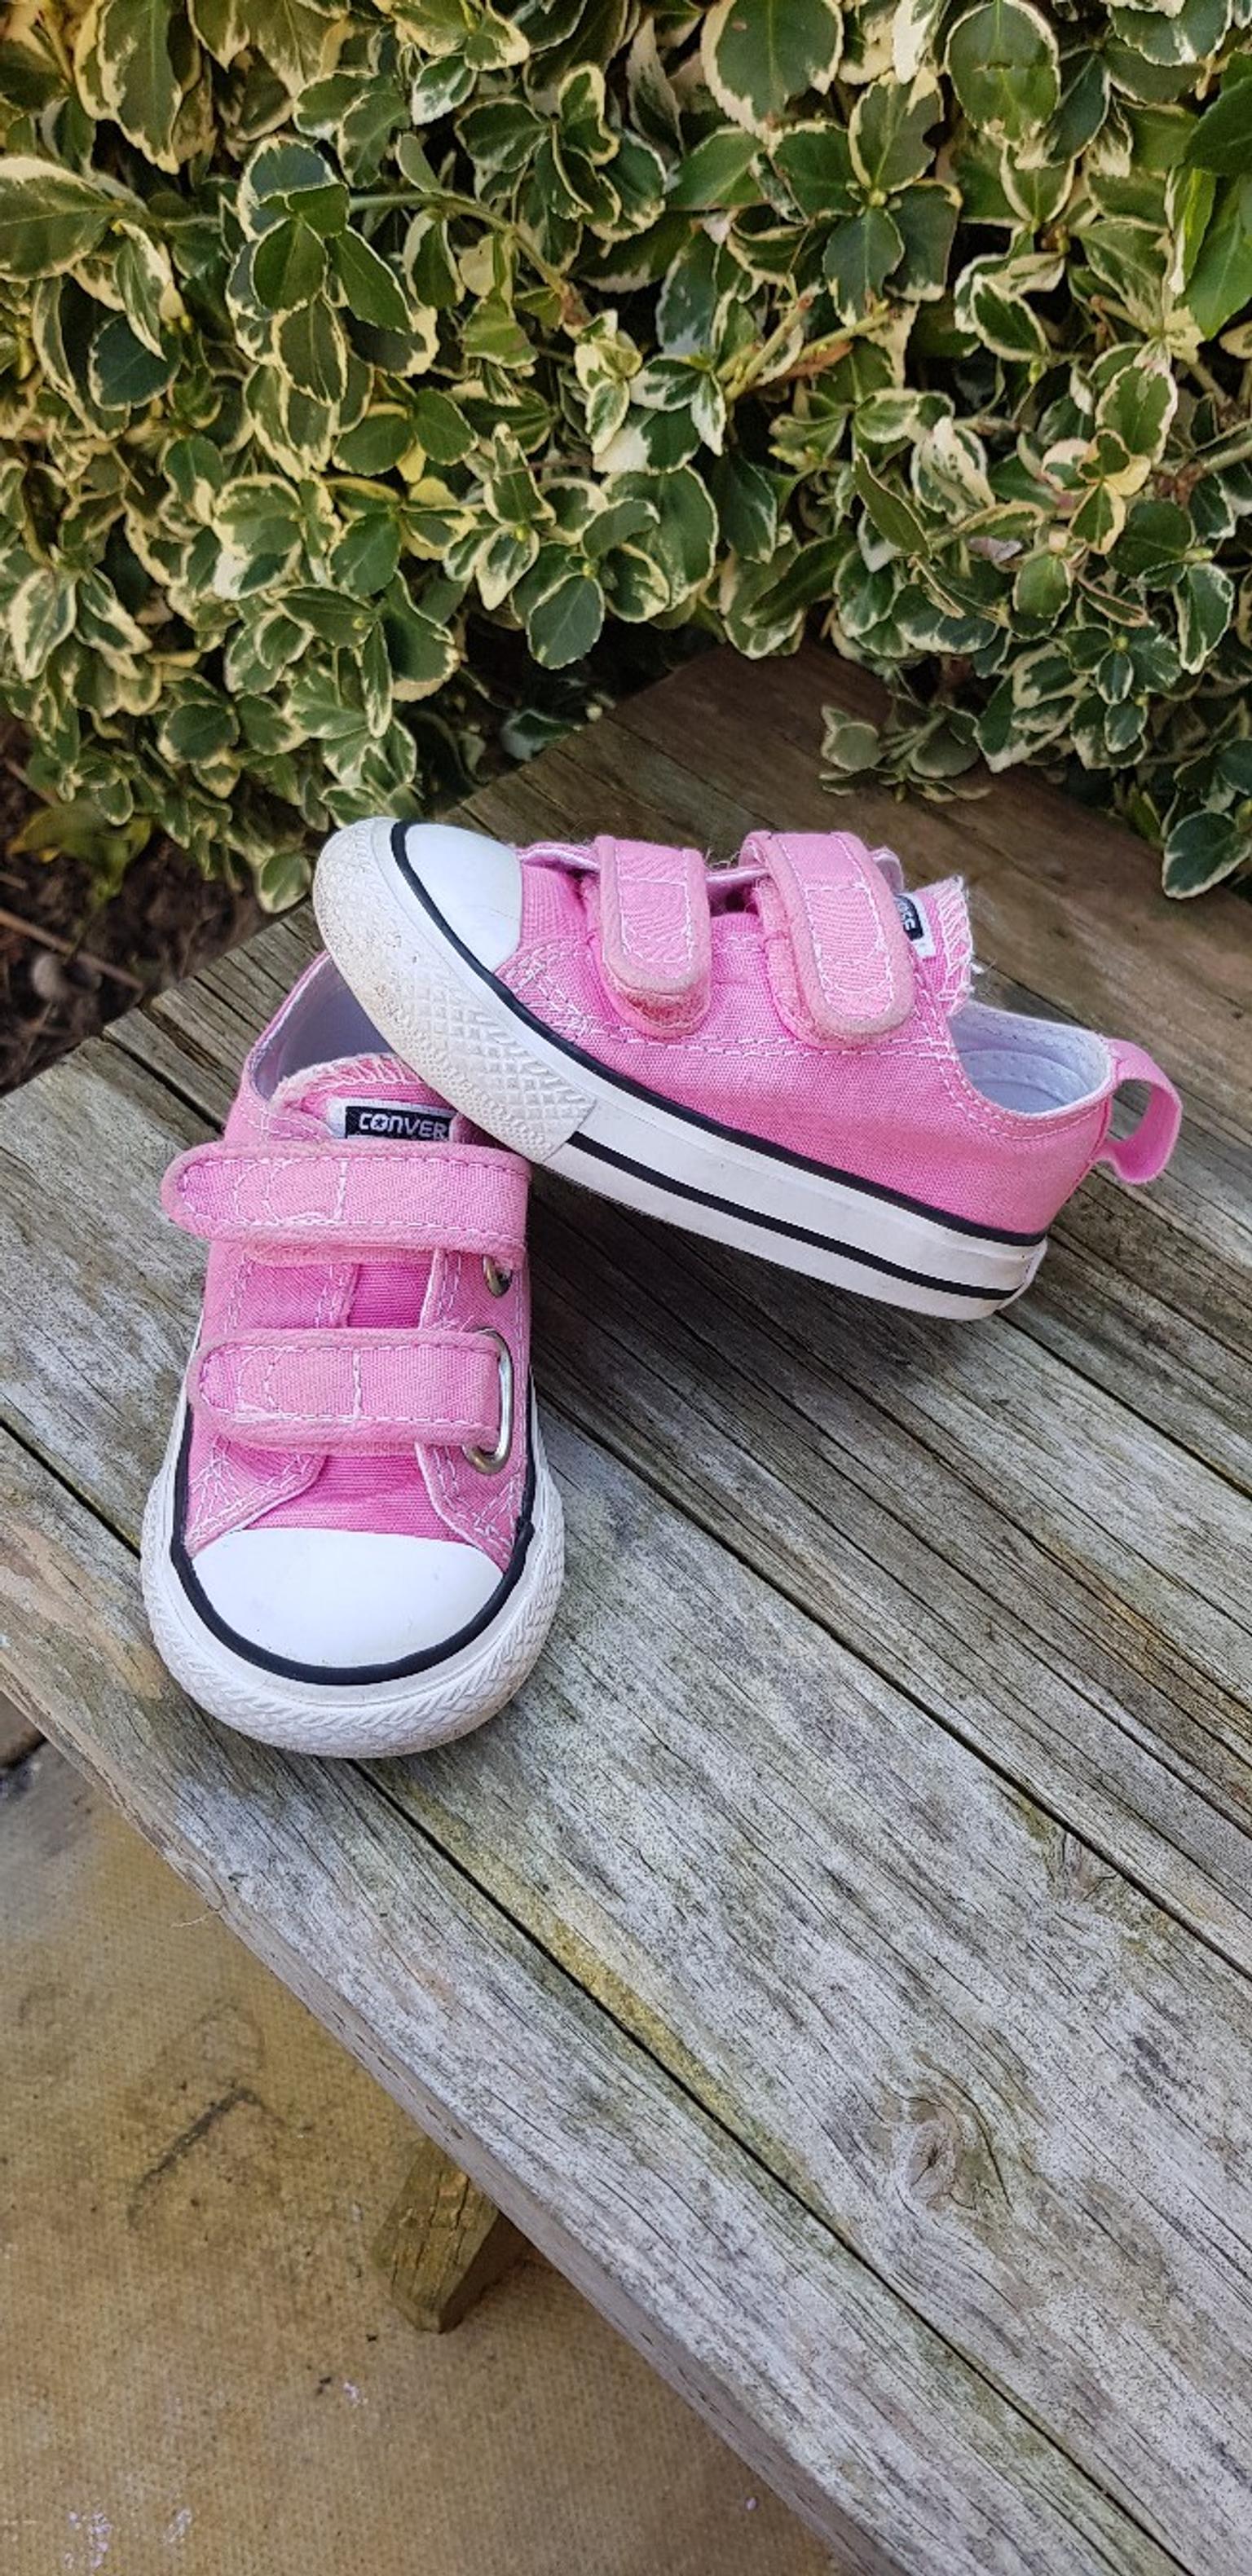 size 5 converse baby